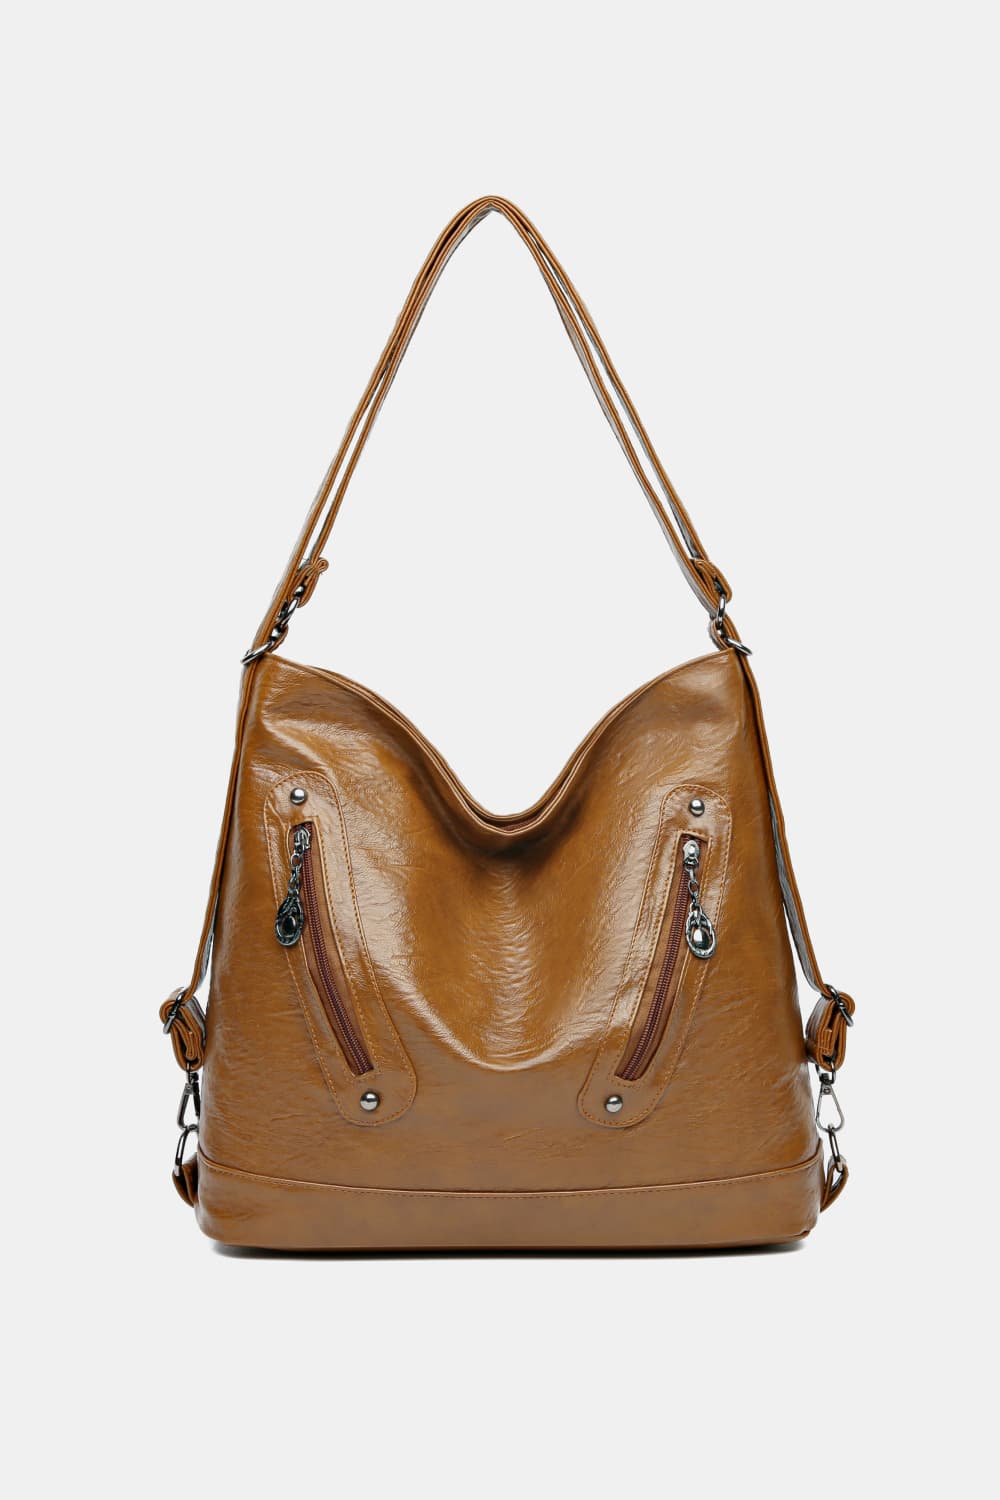 COUNTRY BEAUTY PU Leather Shoulder Bag